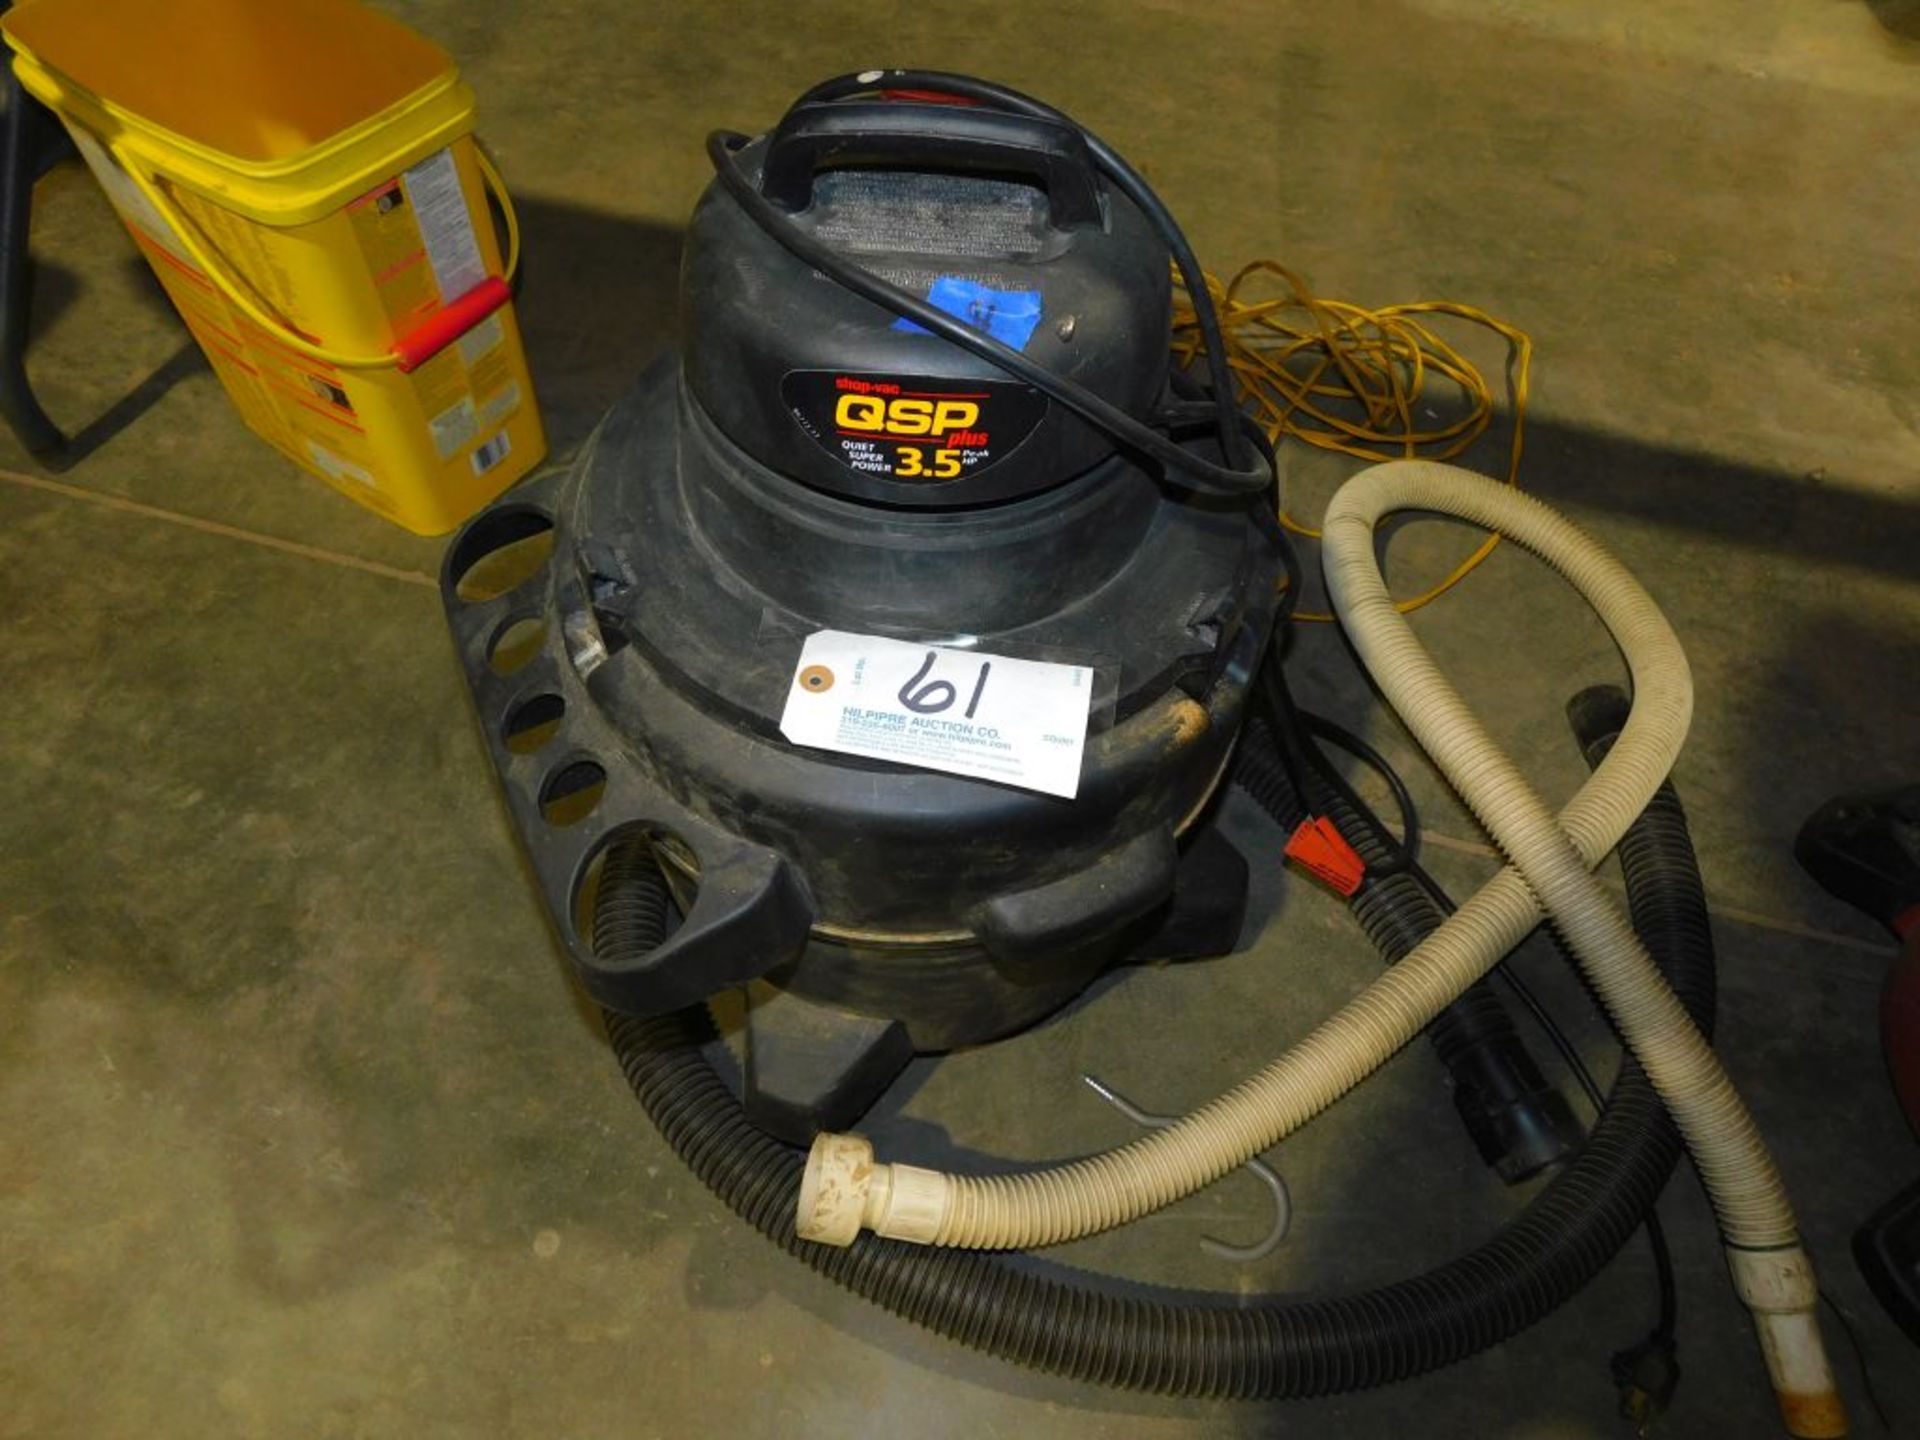 QSP Plus 3.5 hp shop vac. (Located at and to be picked up at: 2862 Wagner Rd., Waterloo, IA)